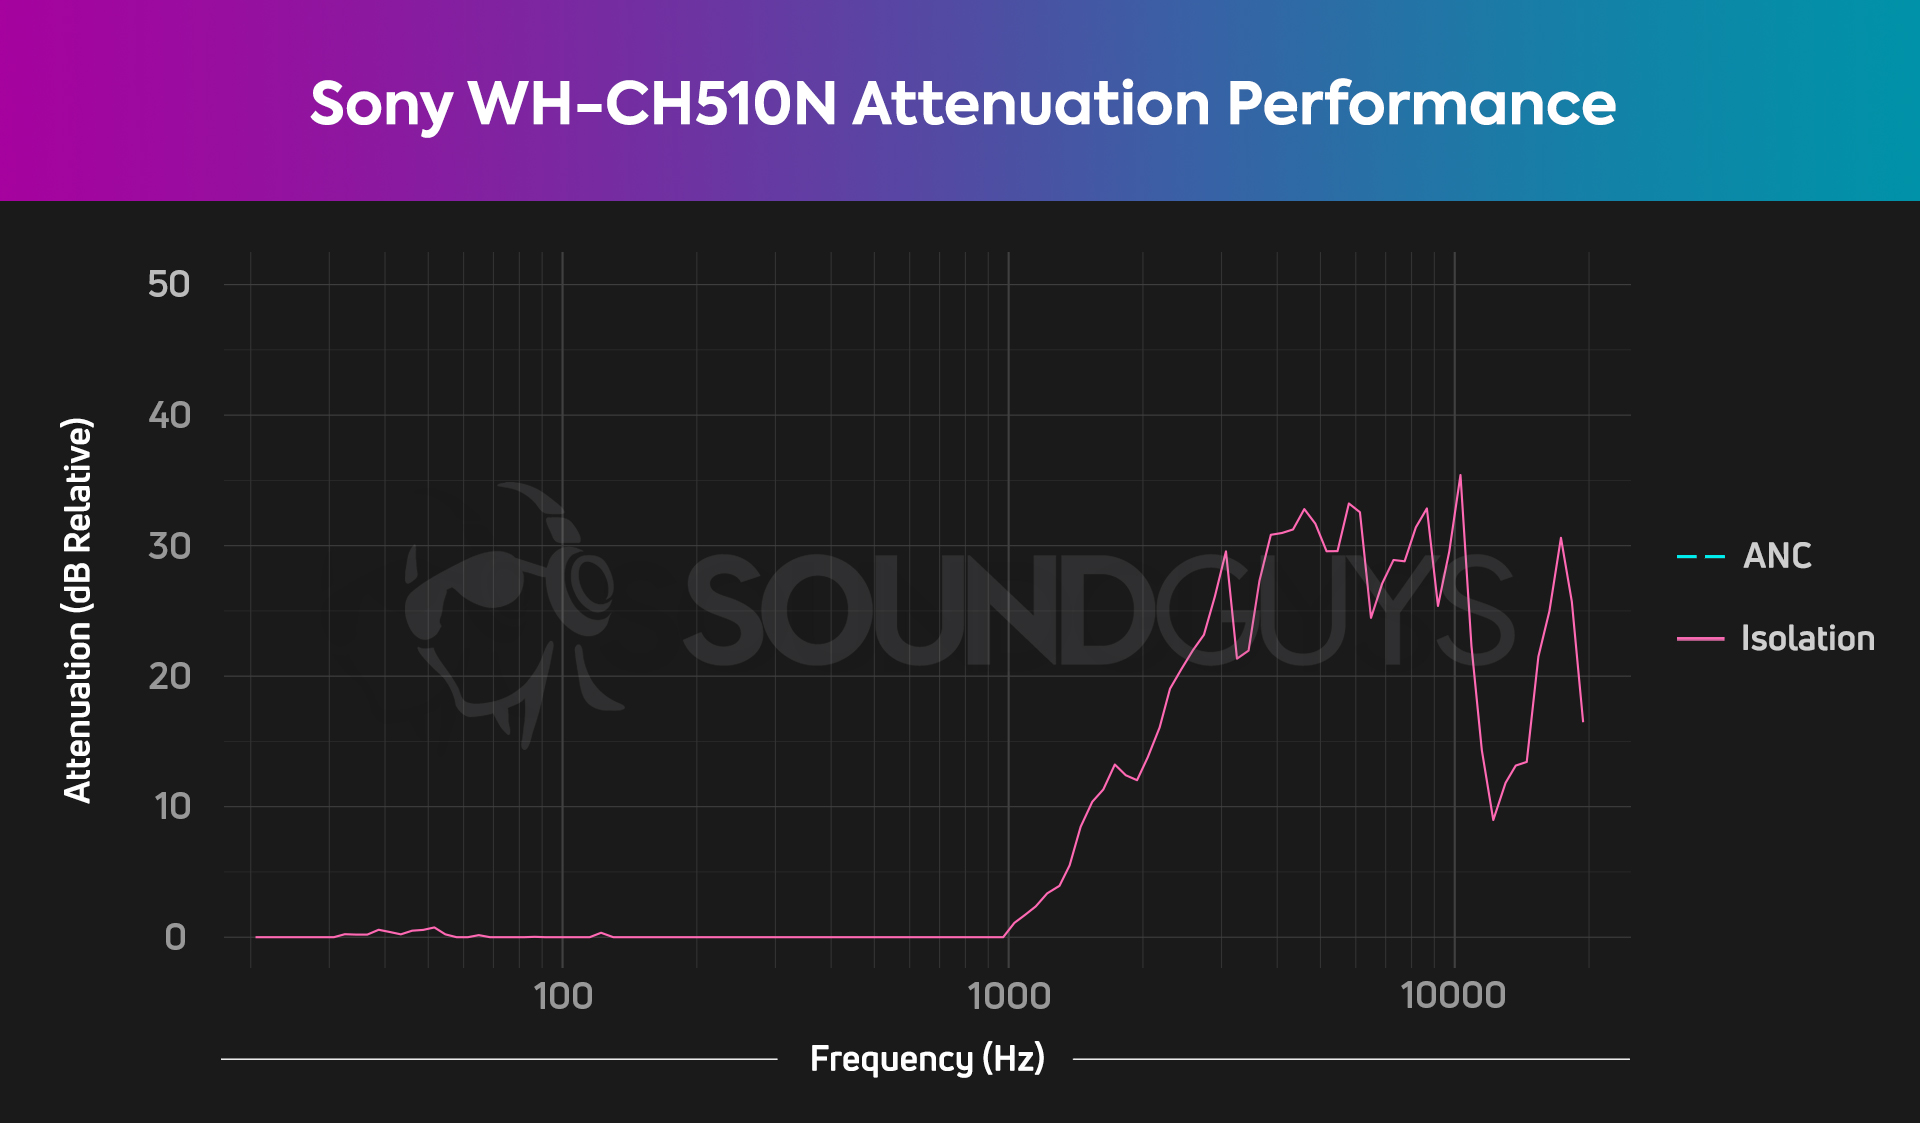 The Sony WH-CH510 only starts blocking out noise around 1kHz, while letting everything with lower frequencies in unimpeded.